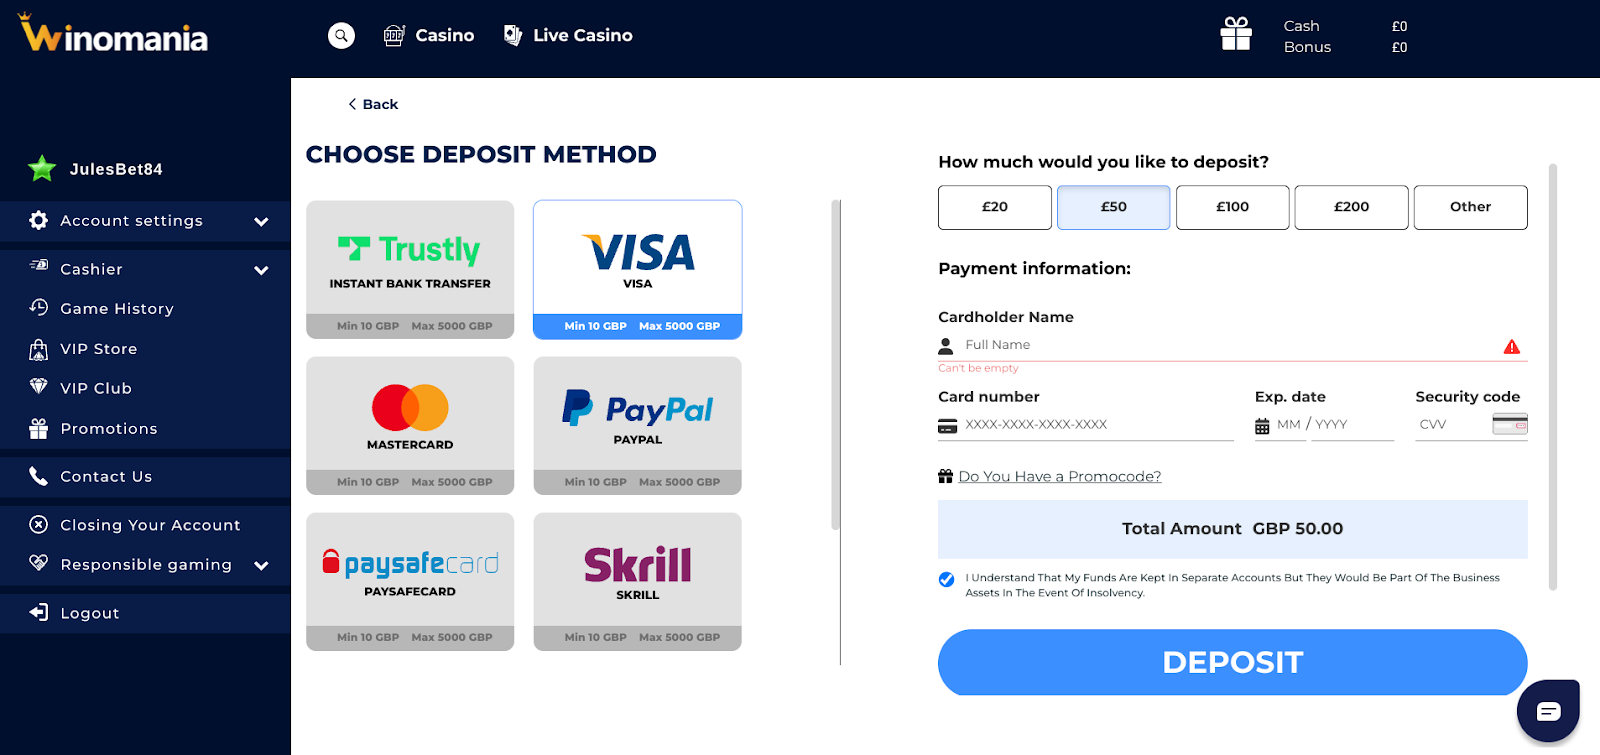 Enter your payment details and confirm your deposit